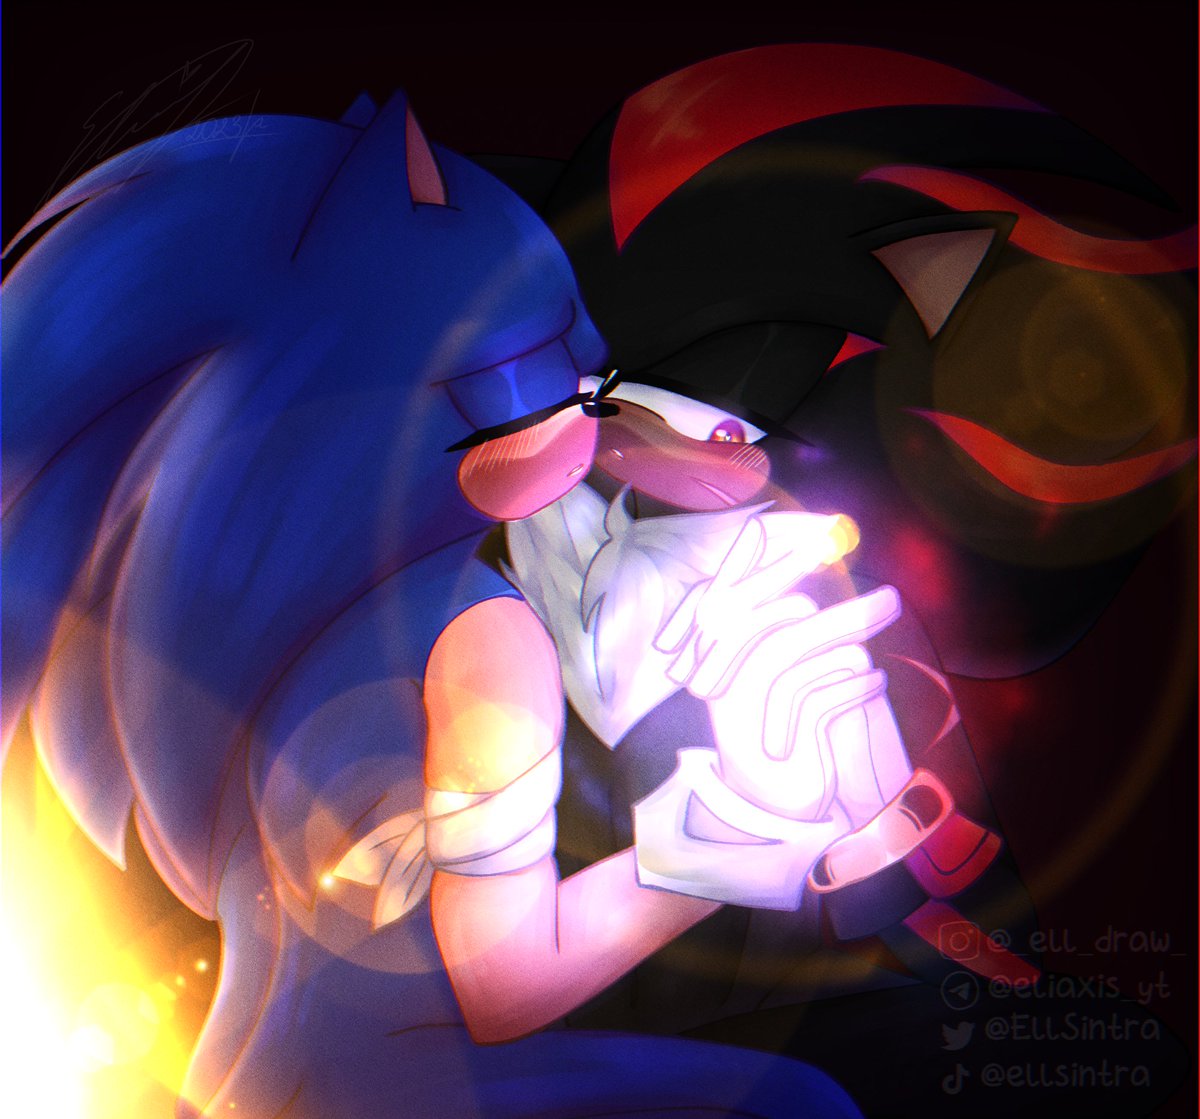 '- close your eyes and relax, direct the power to our palms'

(This is a moment from some fanfiction on Wattpad)

#sonadow